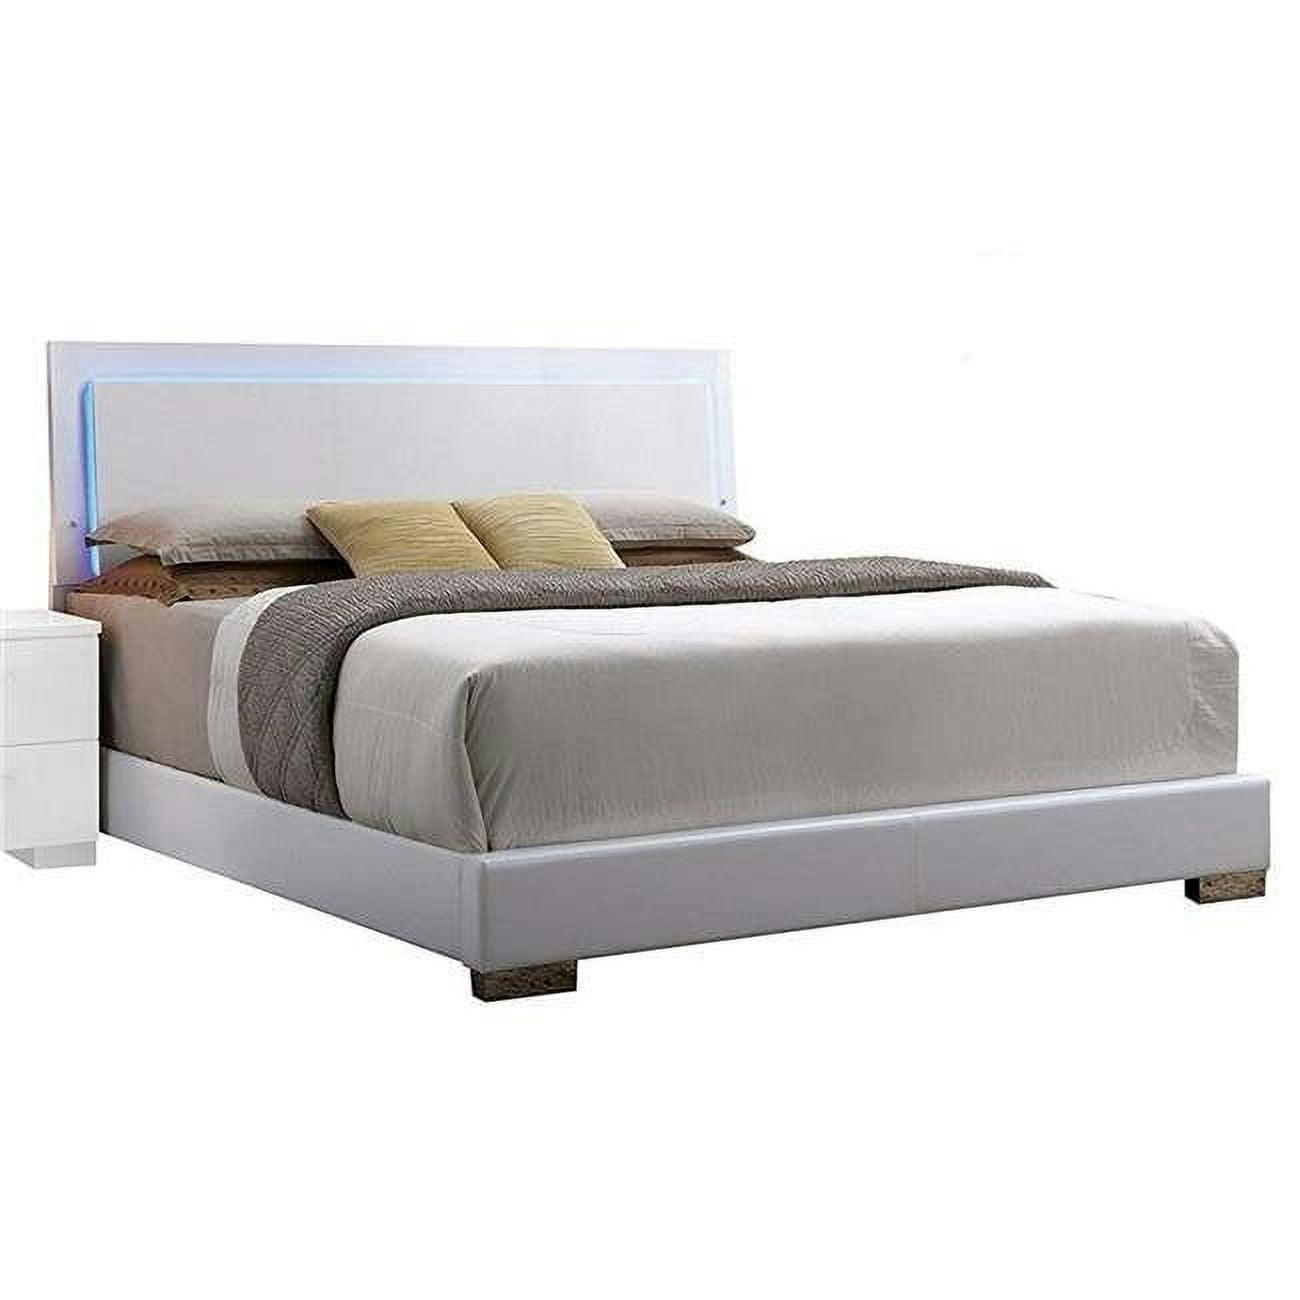 Lorimar High Gloss White Queen Bed with LED Headboard and Faux Leather